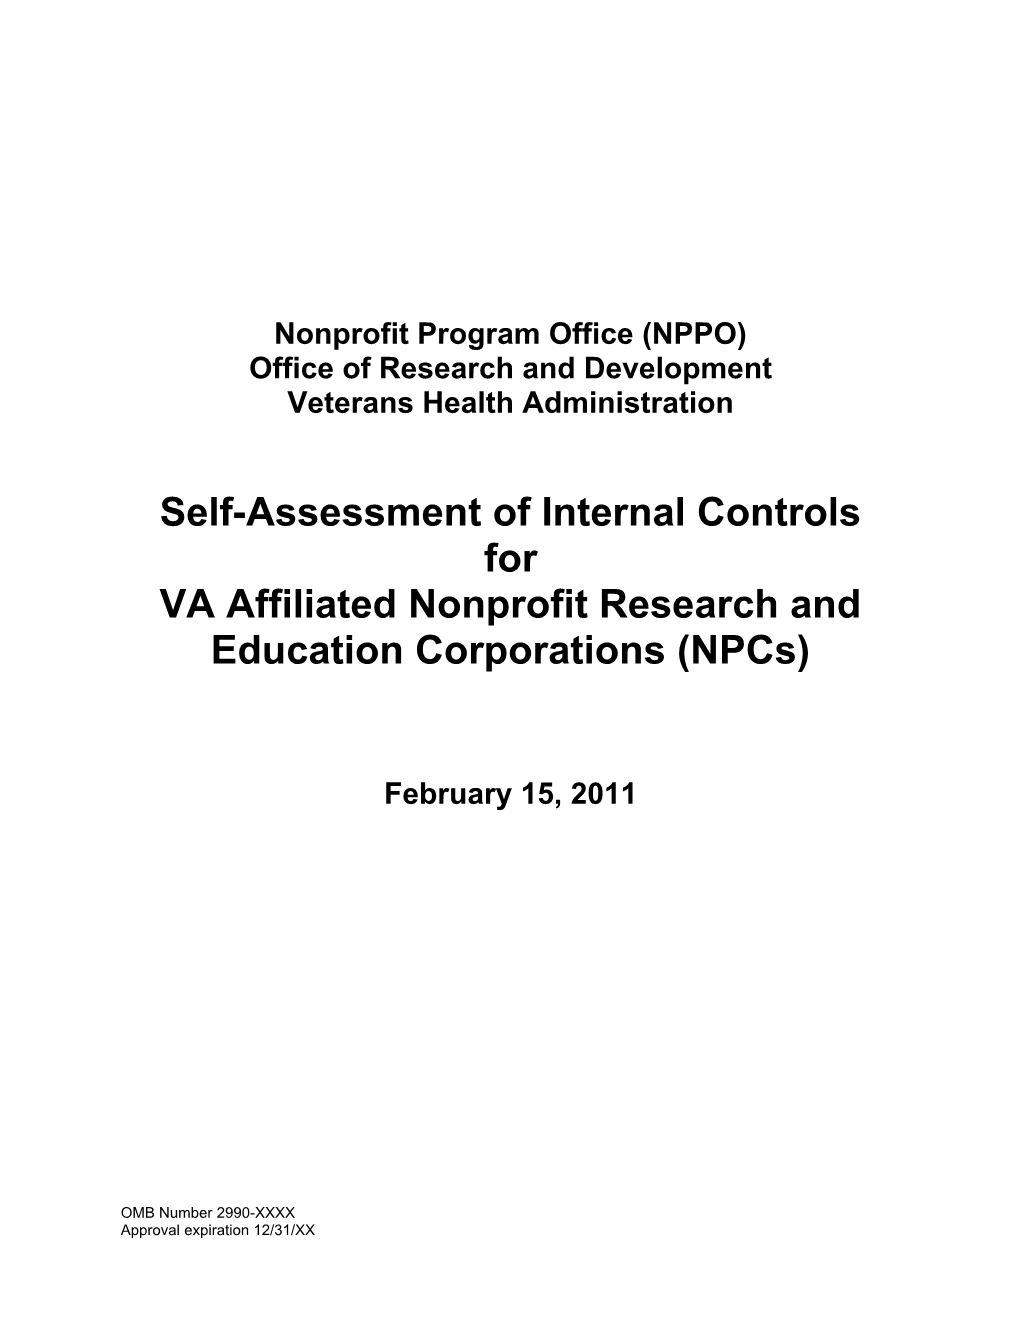 Self-Assessment of Internal Controls for VA Affiliated Nonprofit Research and Education